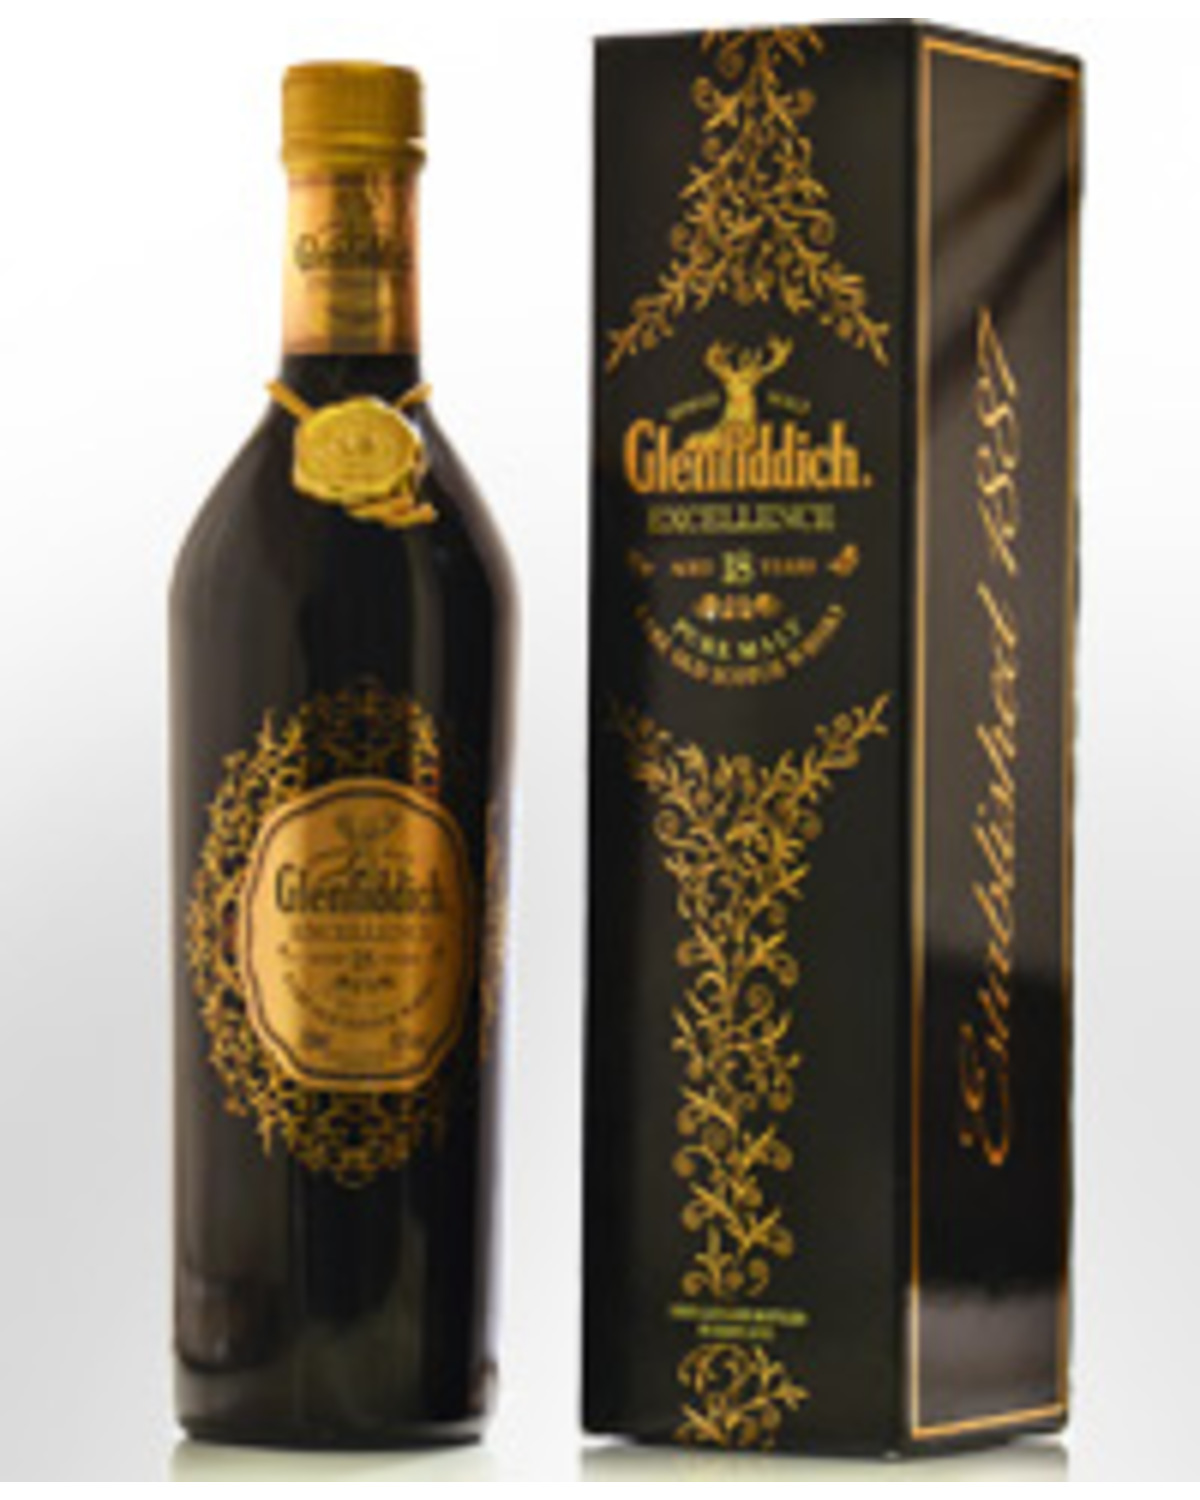 Glenfiddich Excellence 18 Year Old Single Malt Scotch Whisky